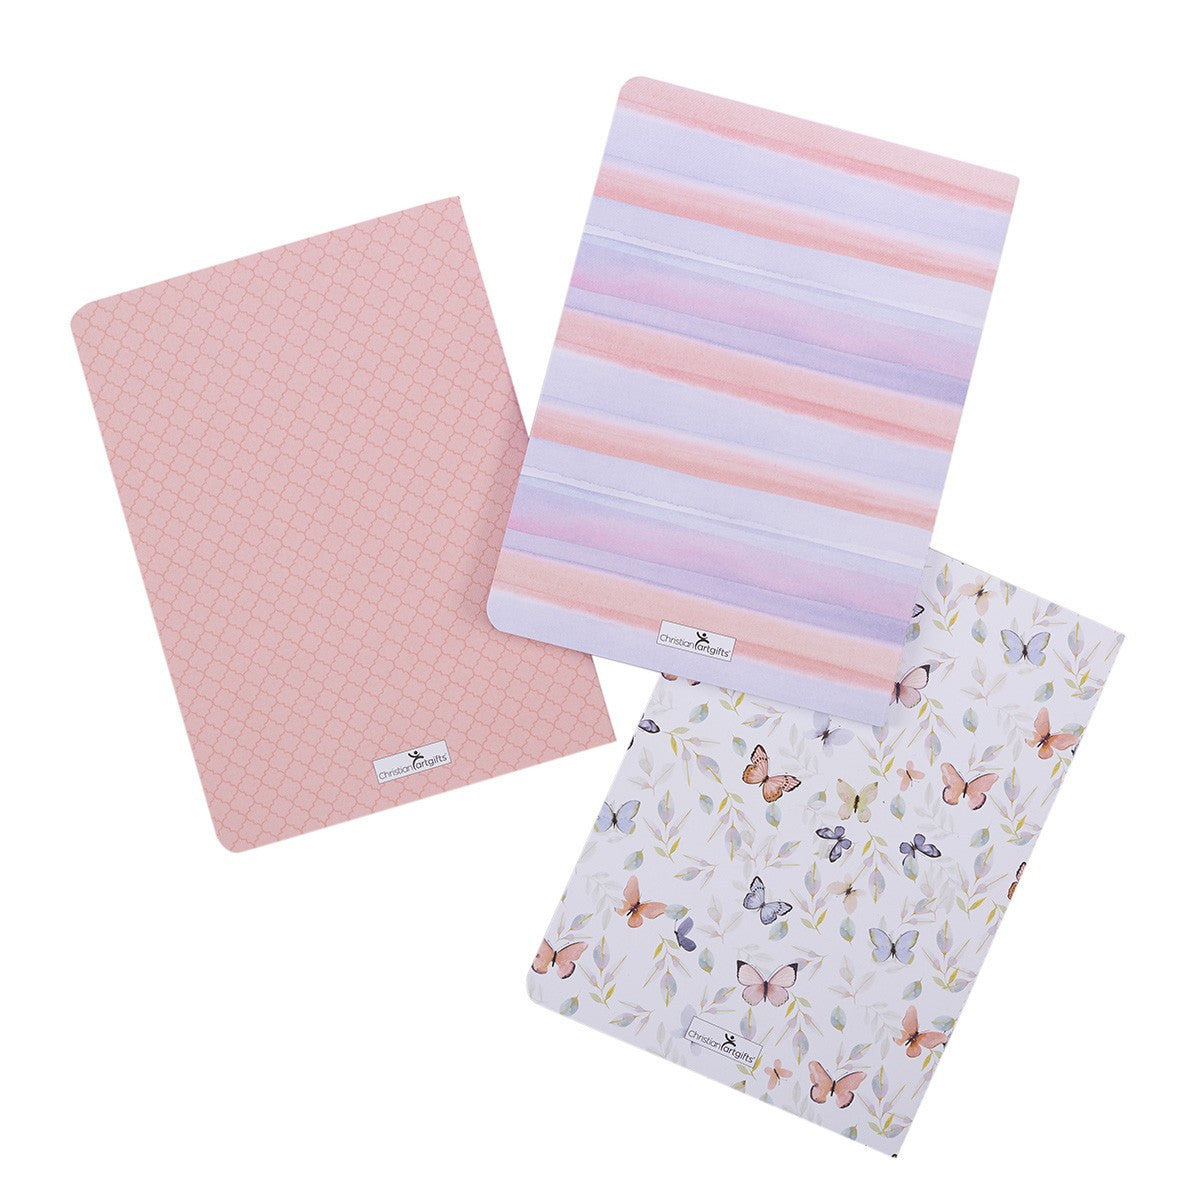 Blessed Large Notebook Set